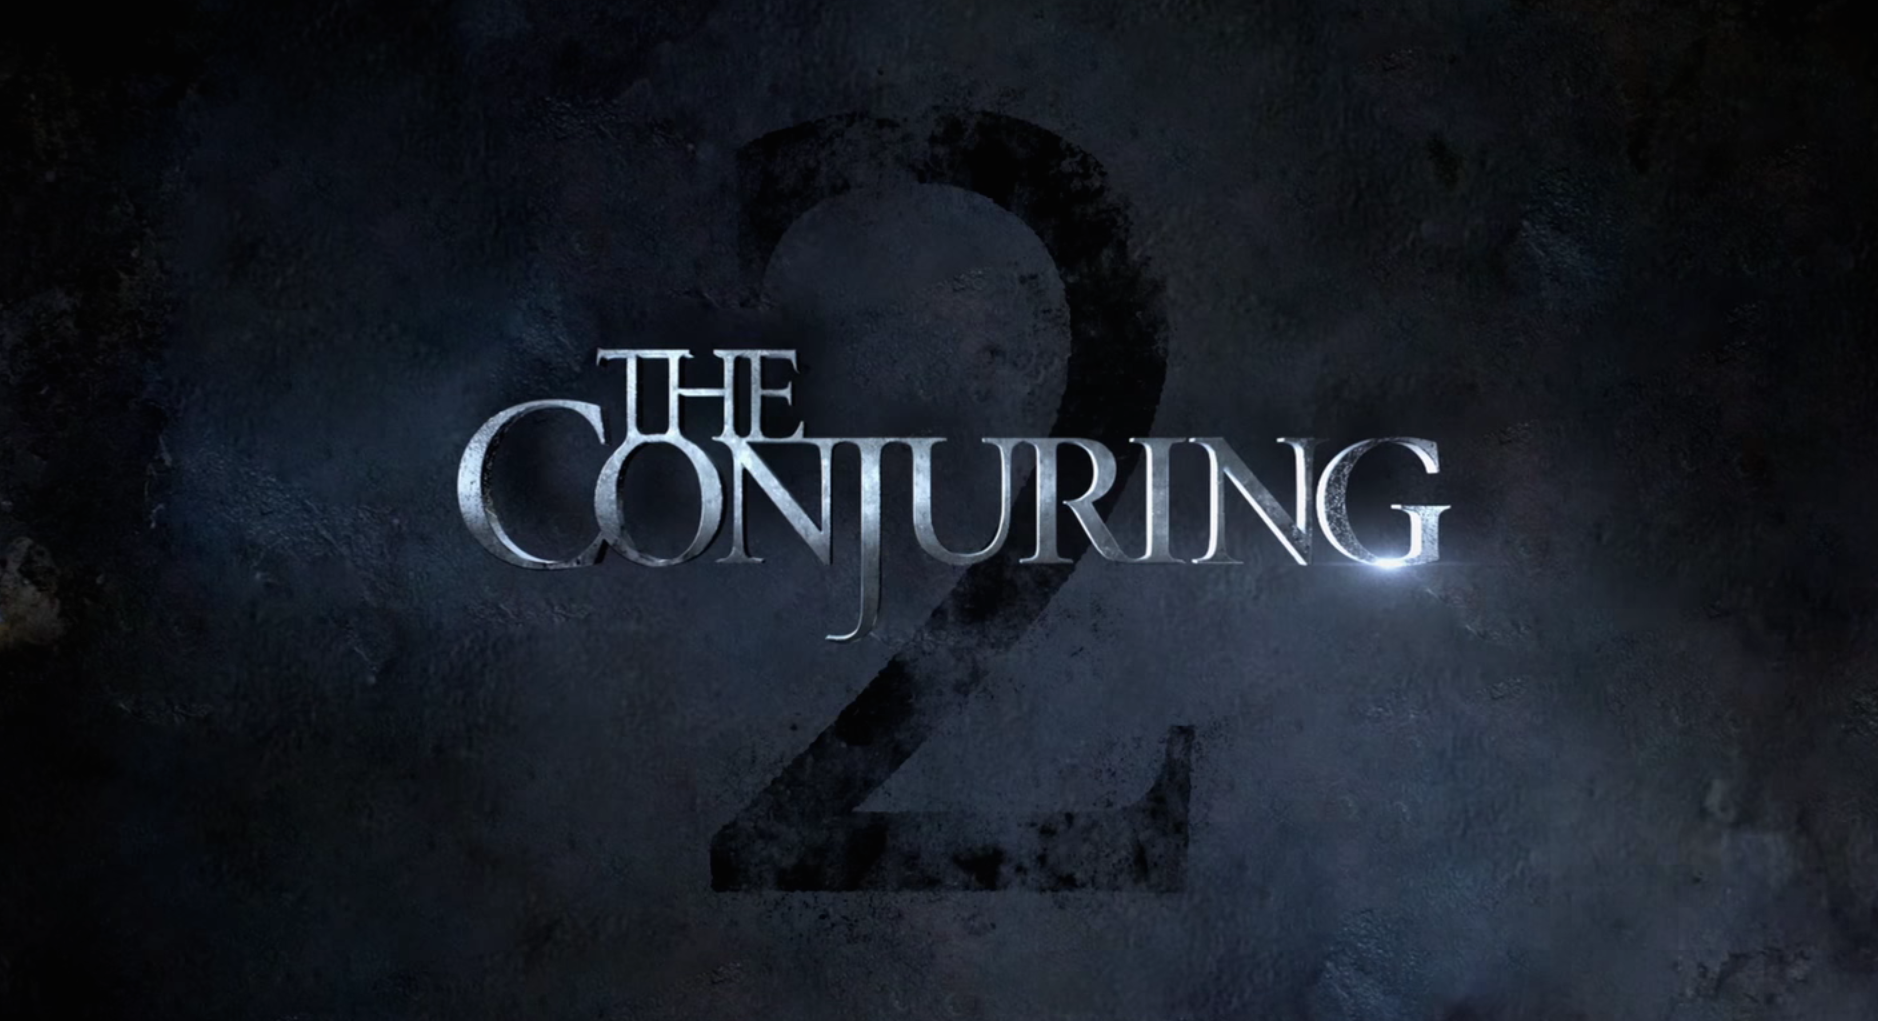 High Resolution Wallpaper | The Conjuring 2 1878x1021 px